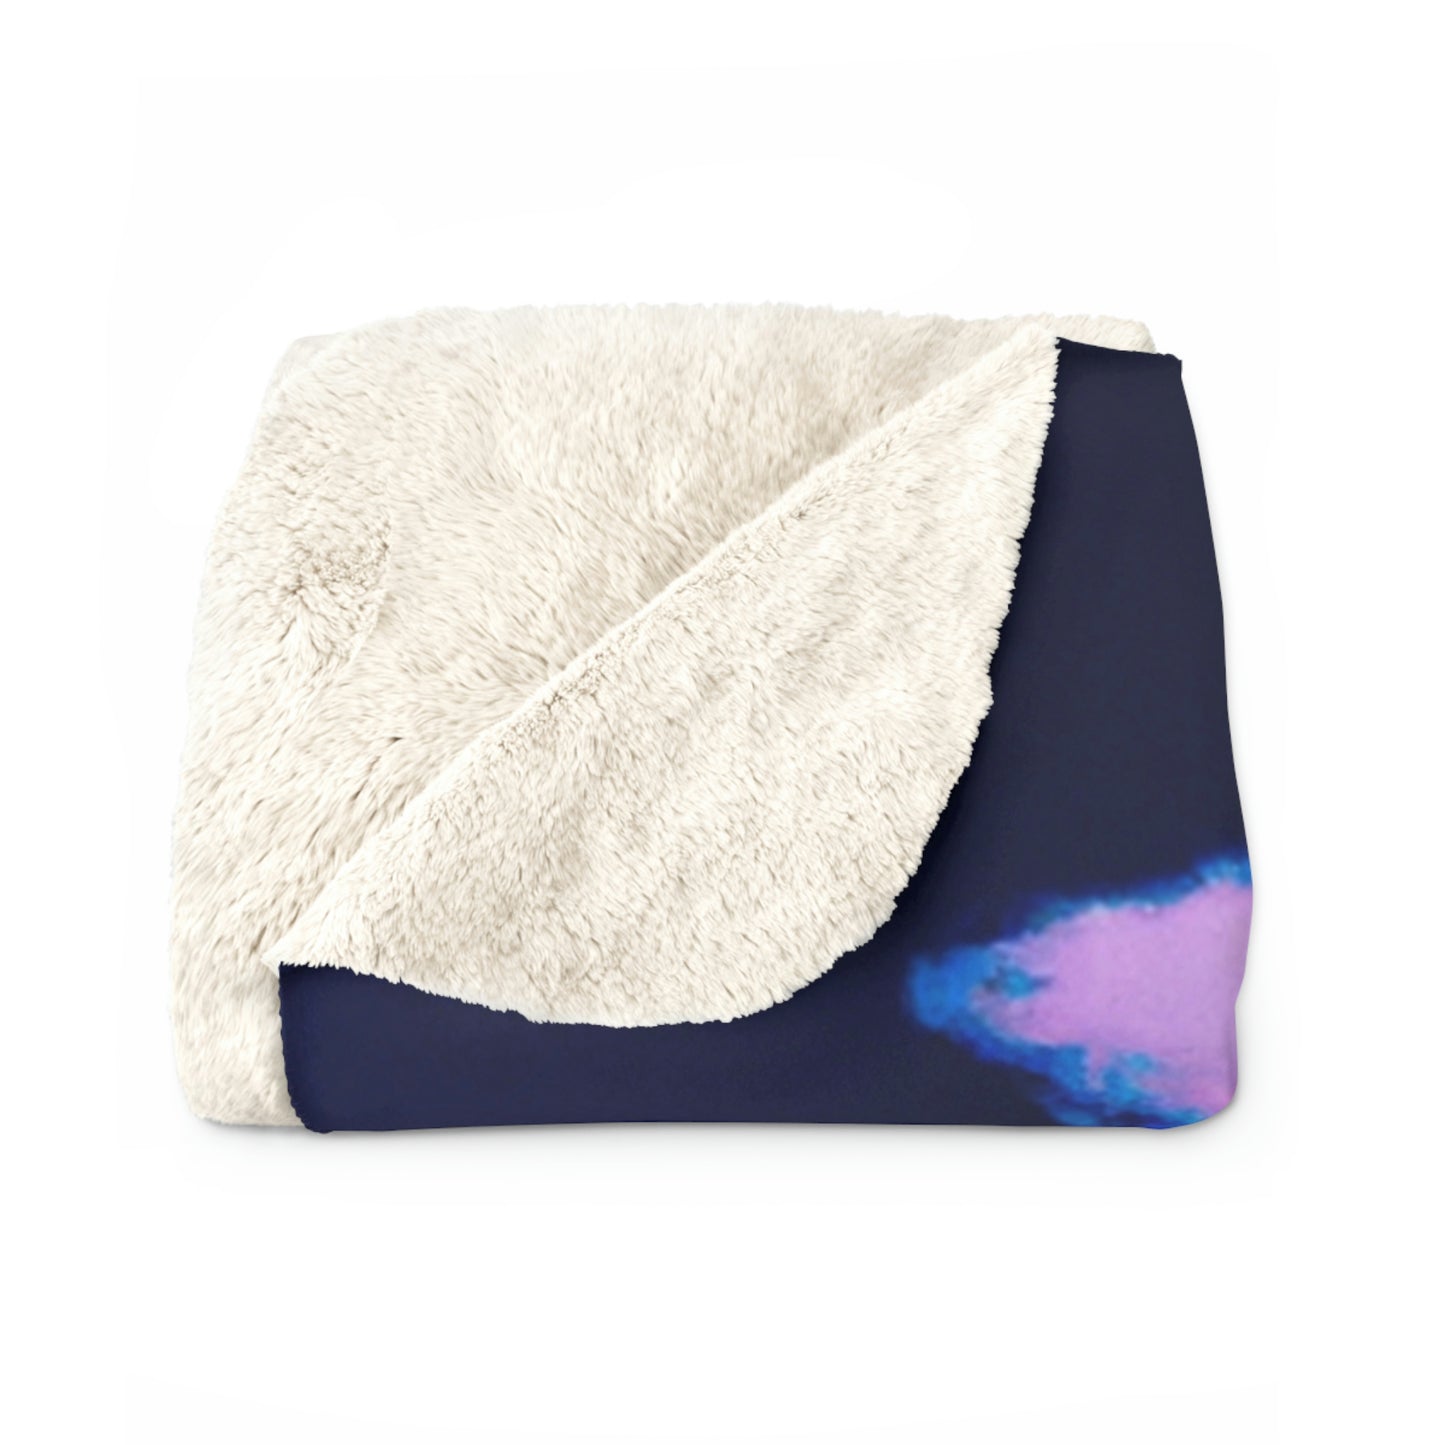 "Painting the Night with Silver Sparks" - The Alien Sherpa Fleece Blanket